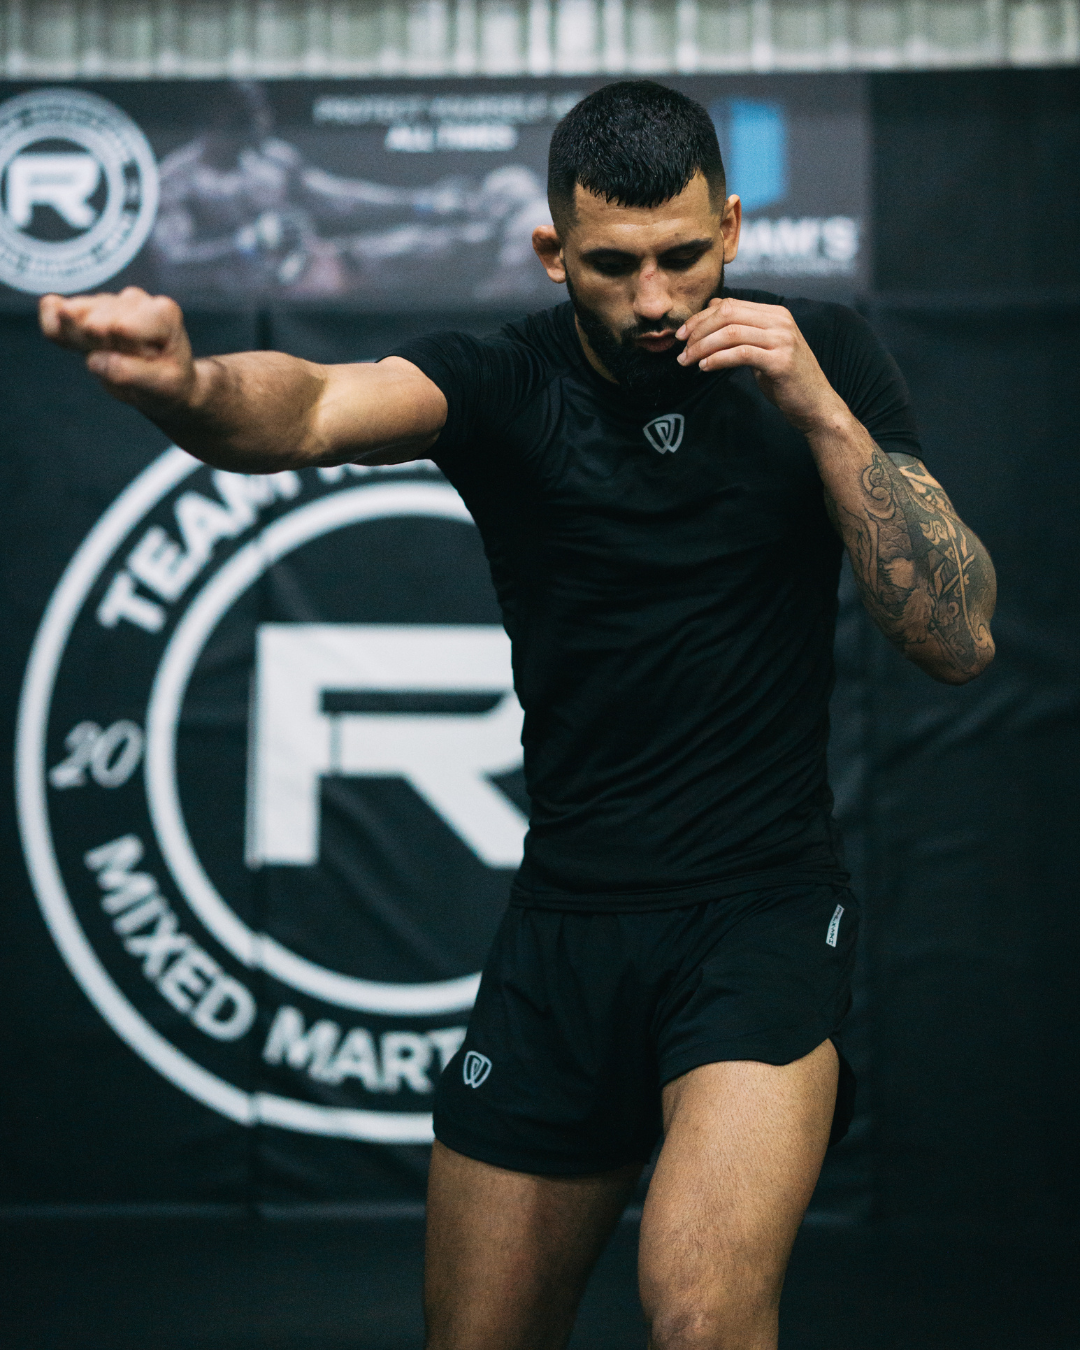 Phalanx jiu jitsu fight shorts for BJJ and MMA, compression shorts perfect for No Gi Jiu Jitsu or Brazilian Jiu-Jitsu and Mixed Martial Arts - all grappling and wrestling Spartan Race, Tough Mudder, Surfing, Yoga - all athletics! Workout clothes for a wide range of everyday sports, gym wear and exercise activities.